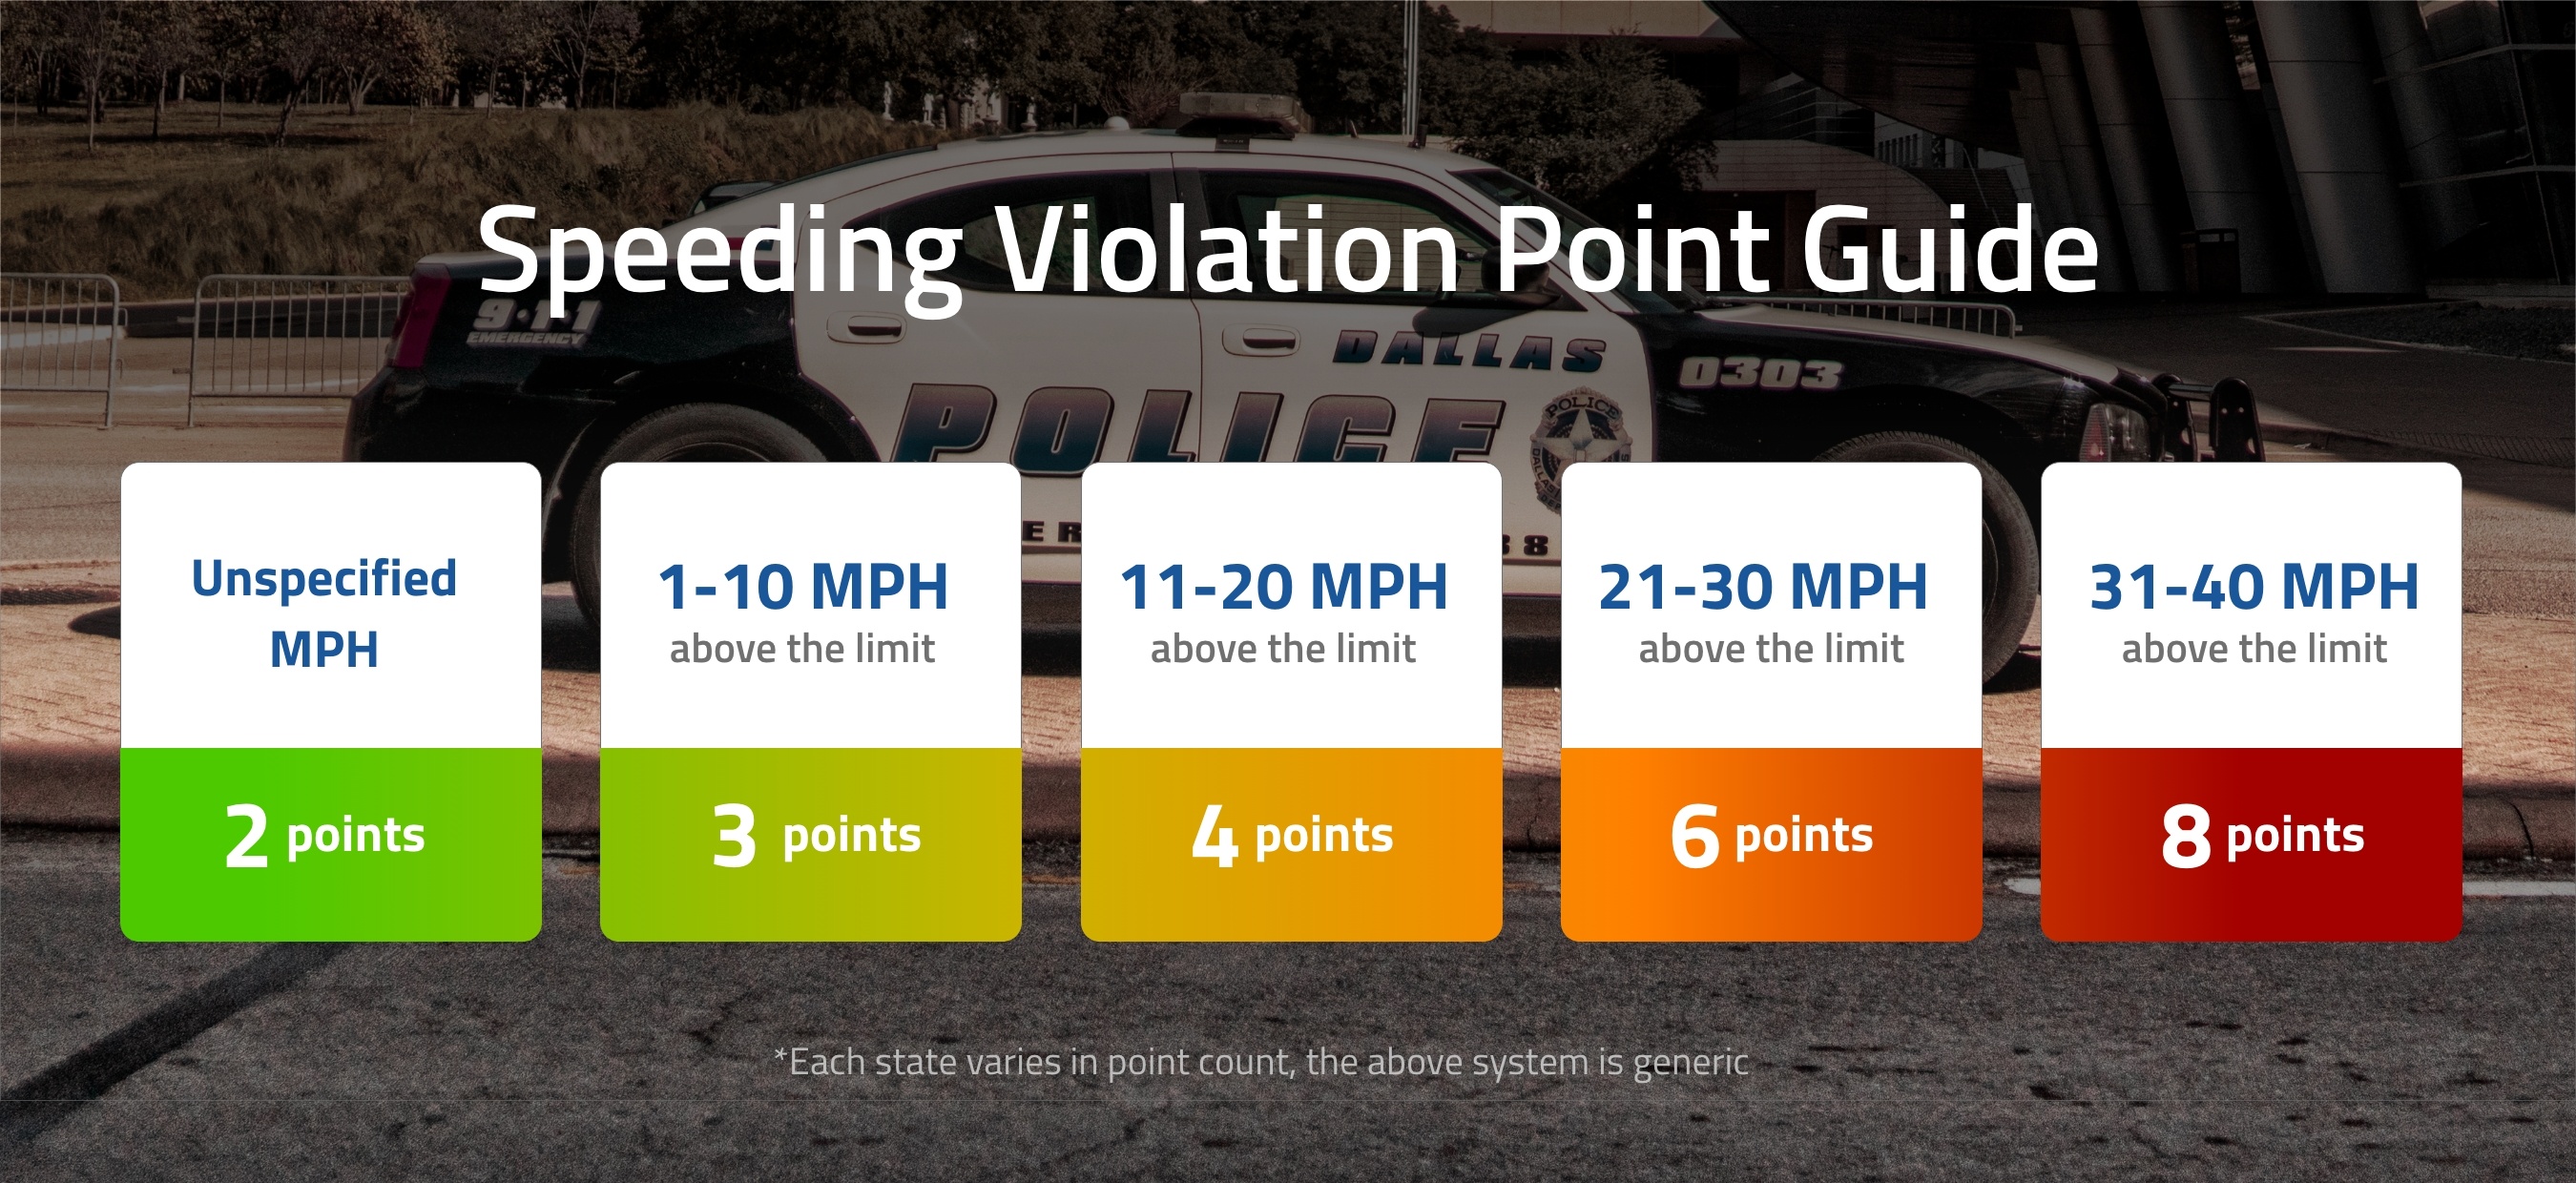 CDL moving violation point guide graphic